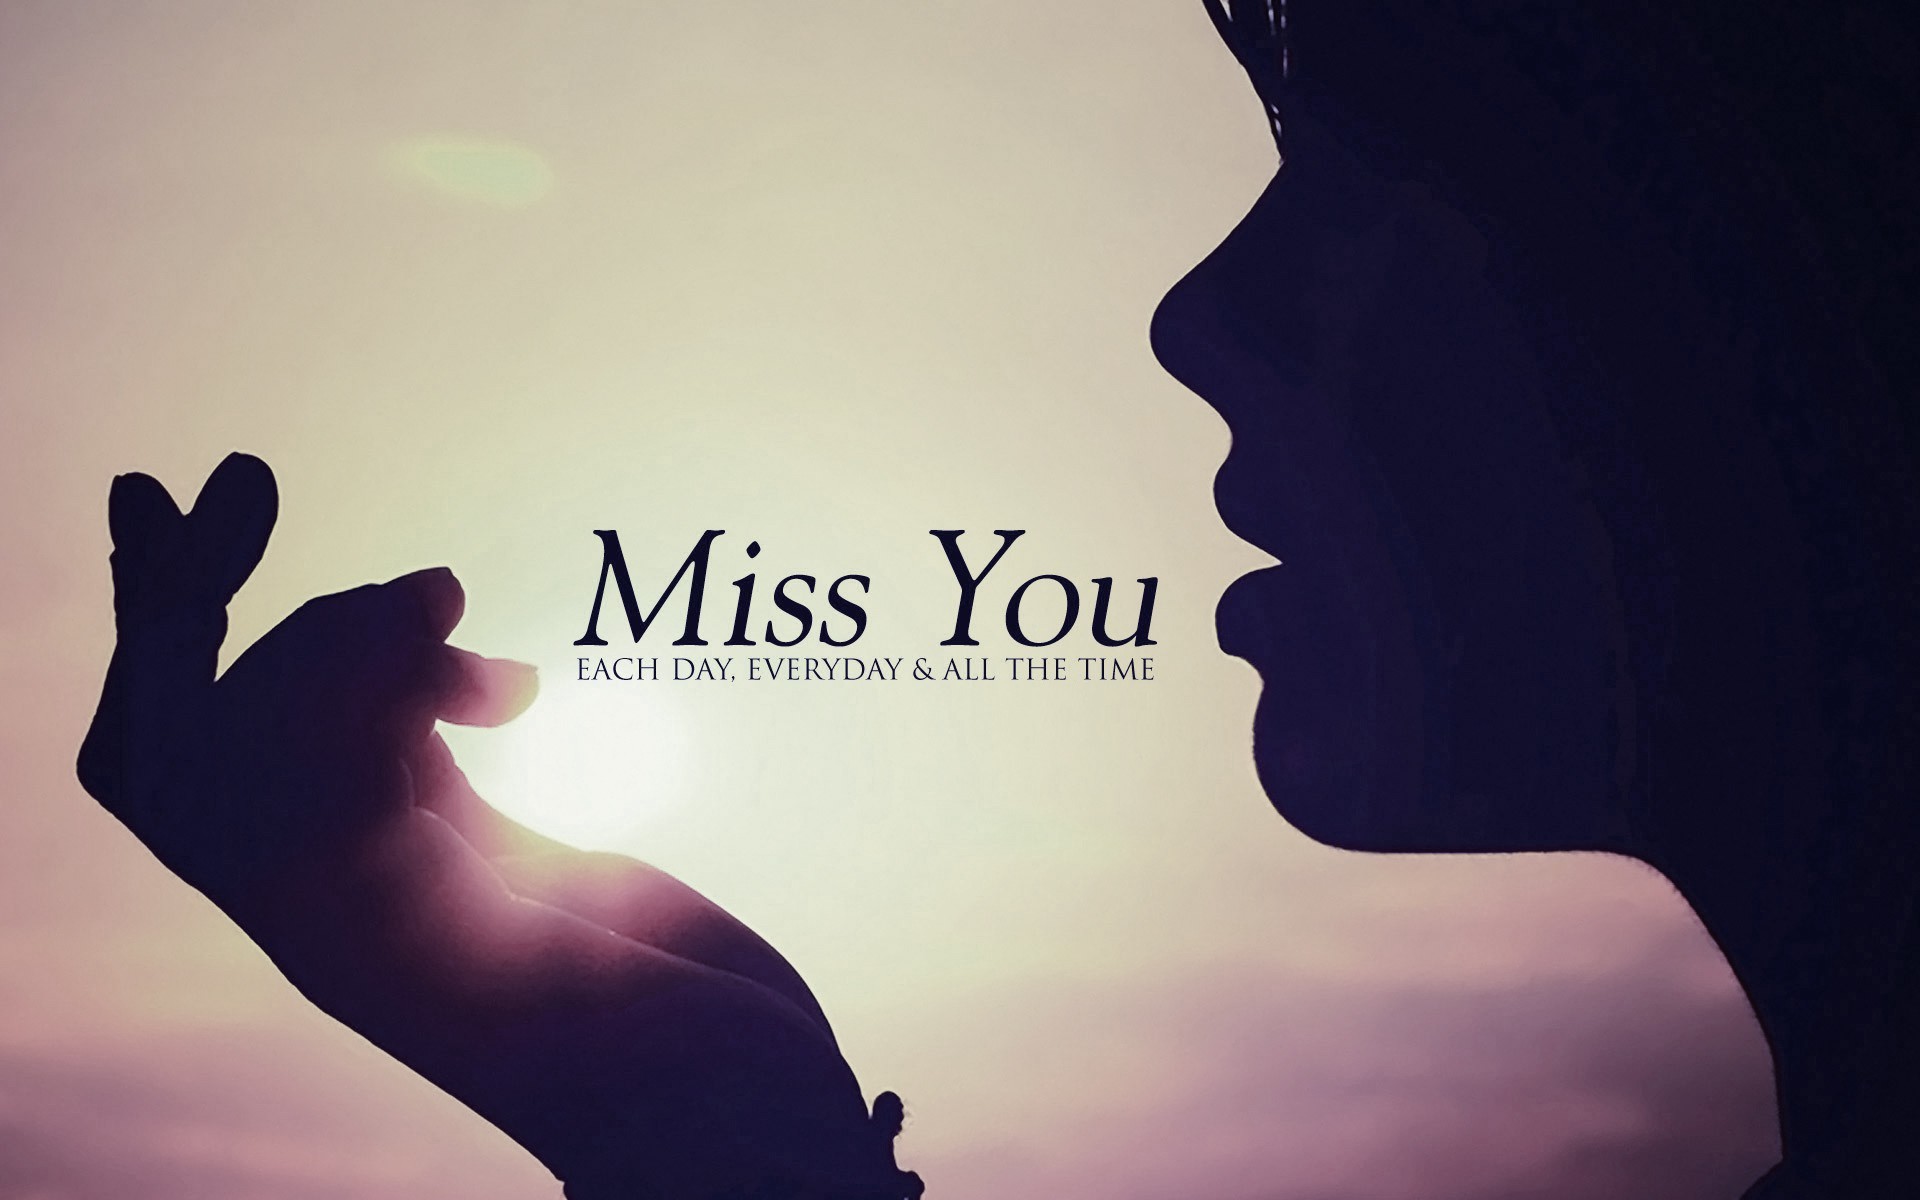 I Miss You Images wallpaper photo pics free hd download | Miss you images, I  miss you wallpaper, I miss you cute